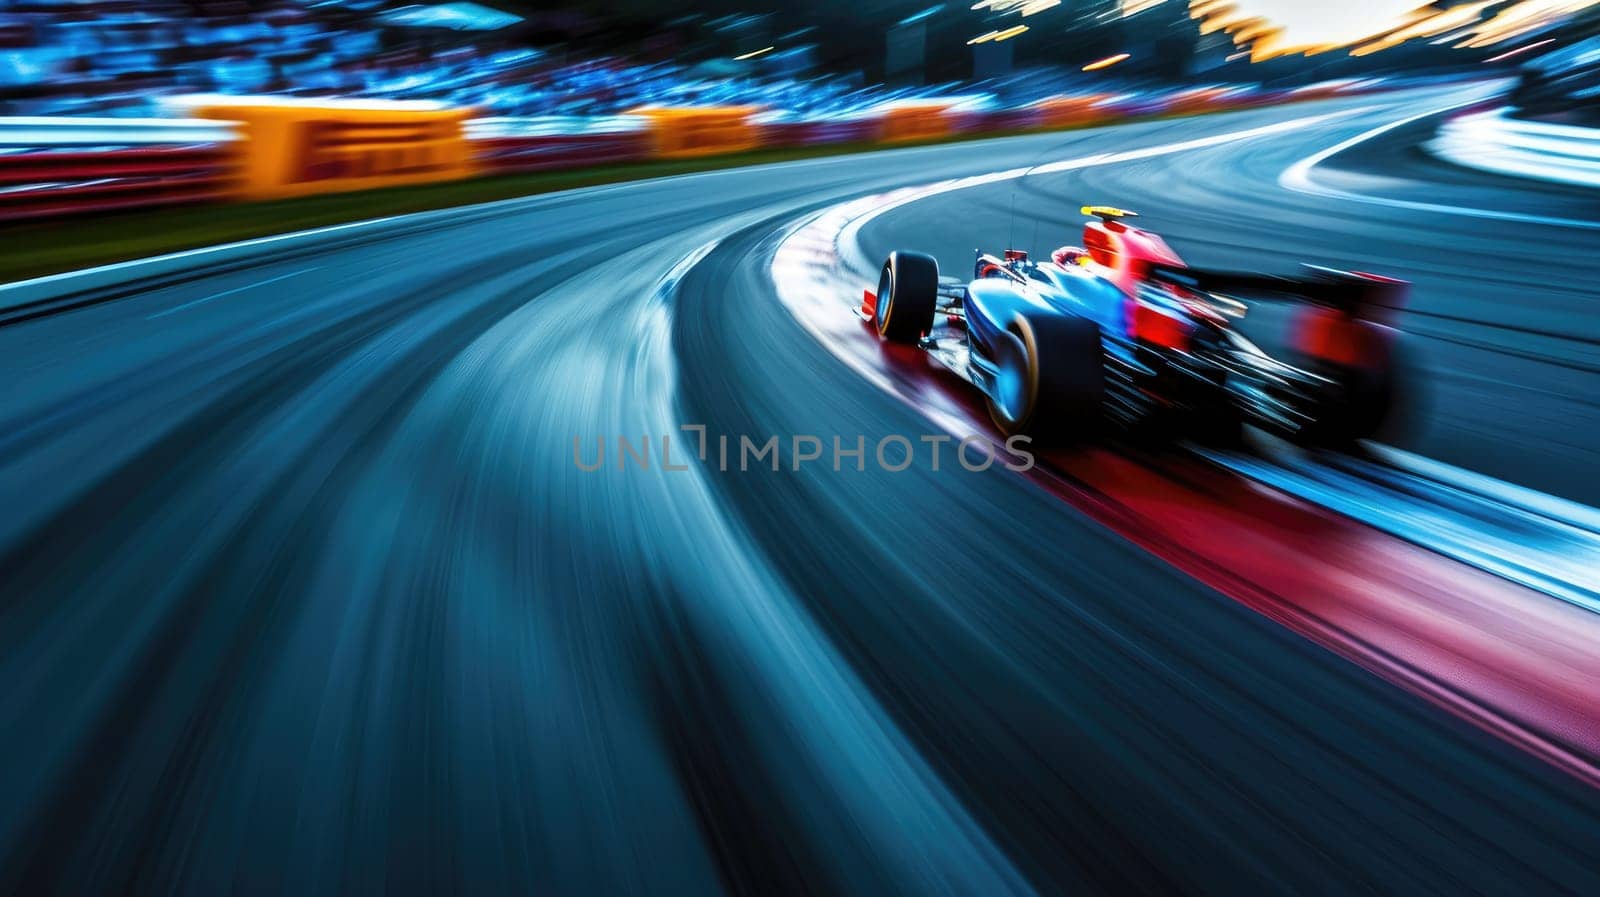 A race car is speeding down a track. The car is red and blue